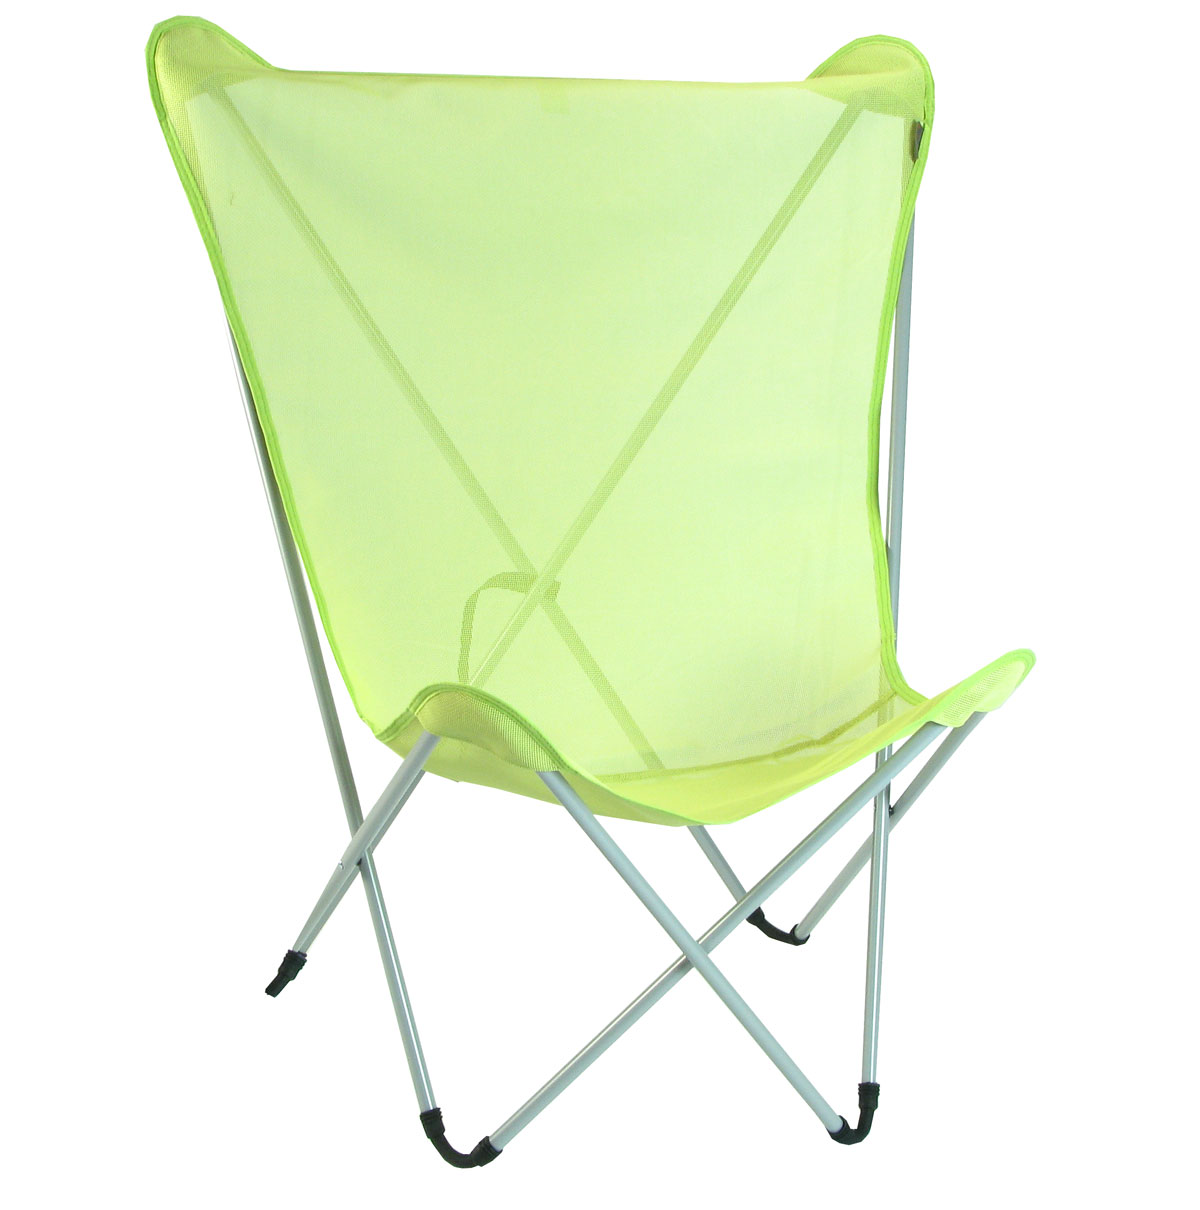 folding camping chair/folding camping chair/Lawn Chairs/portable chair/Butterfly Chairs